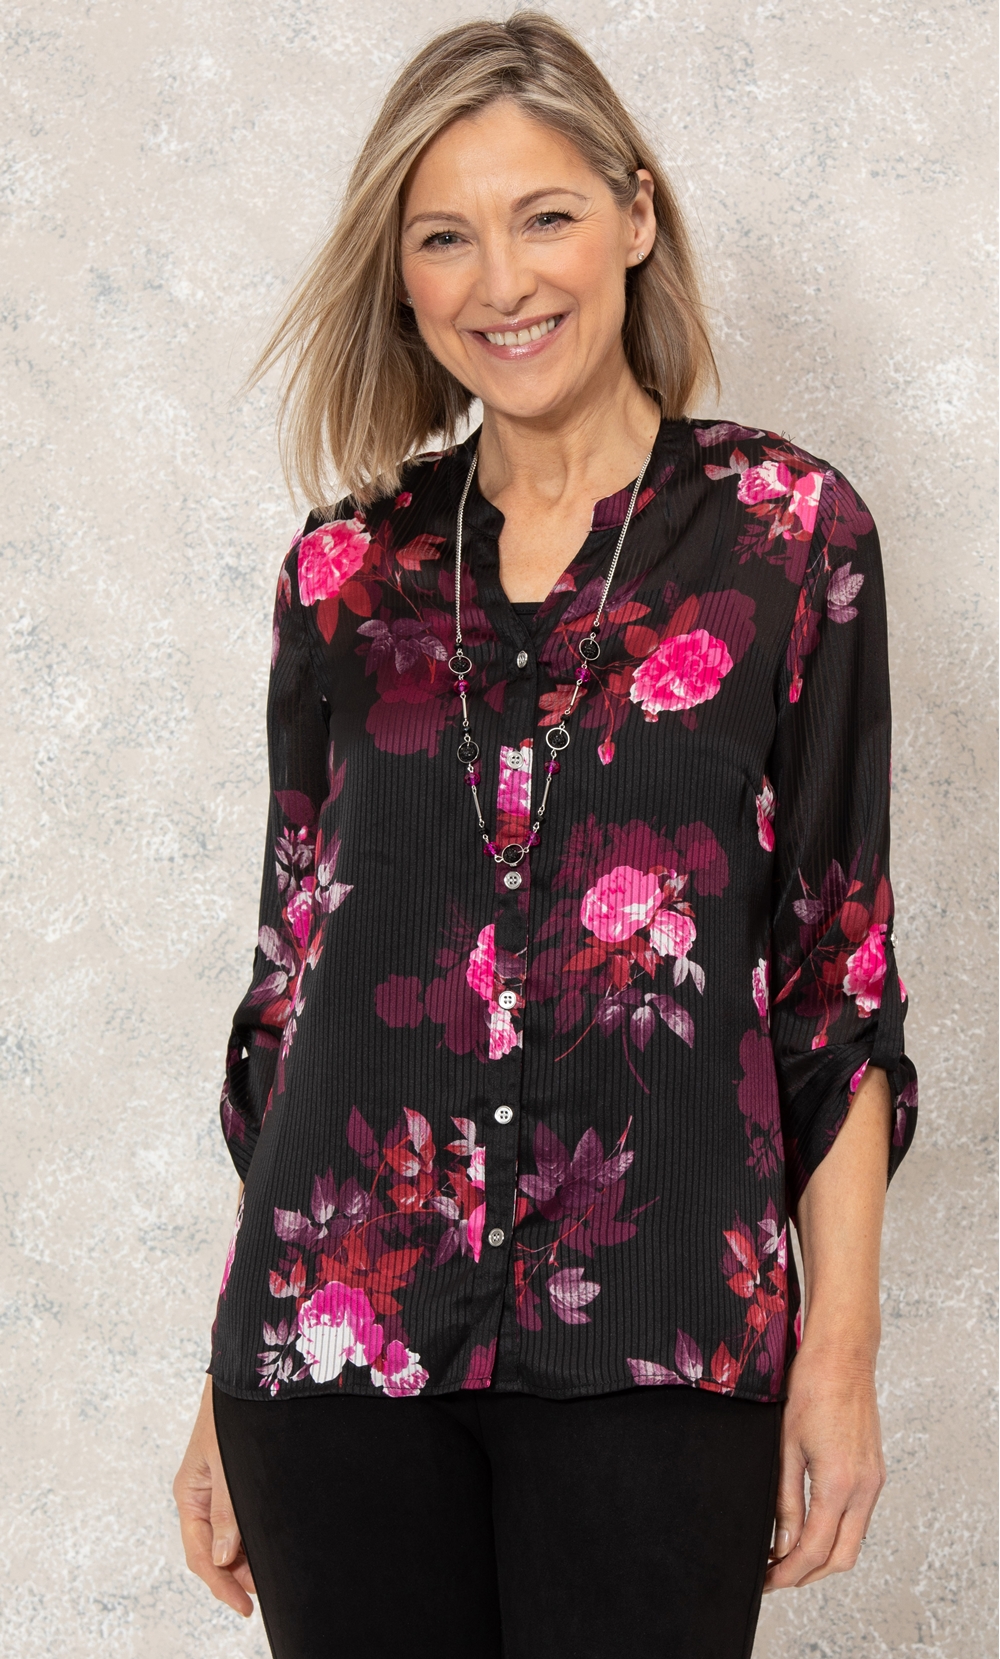 Anna Rose Floral Chiffon Blouse With Necklace in Black | Klass